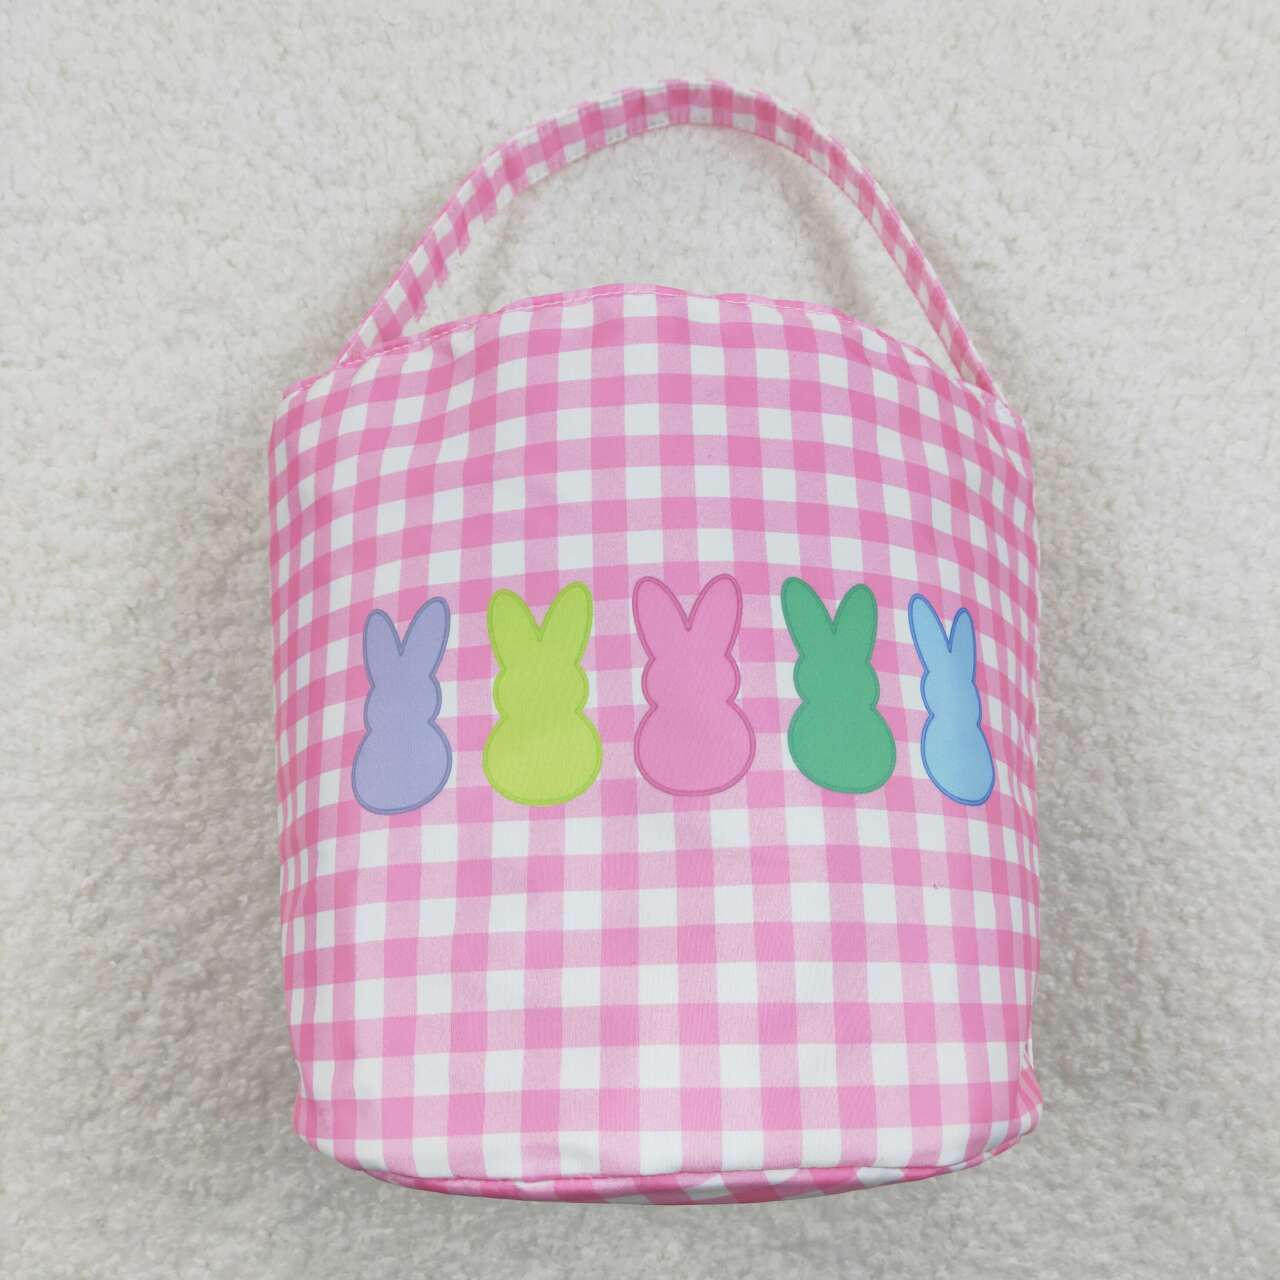 BA0160 Colorful rabbit pink and white plaid lace bucket bag